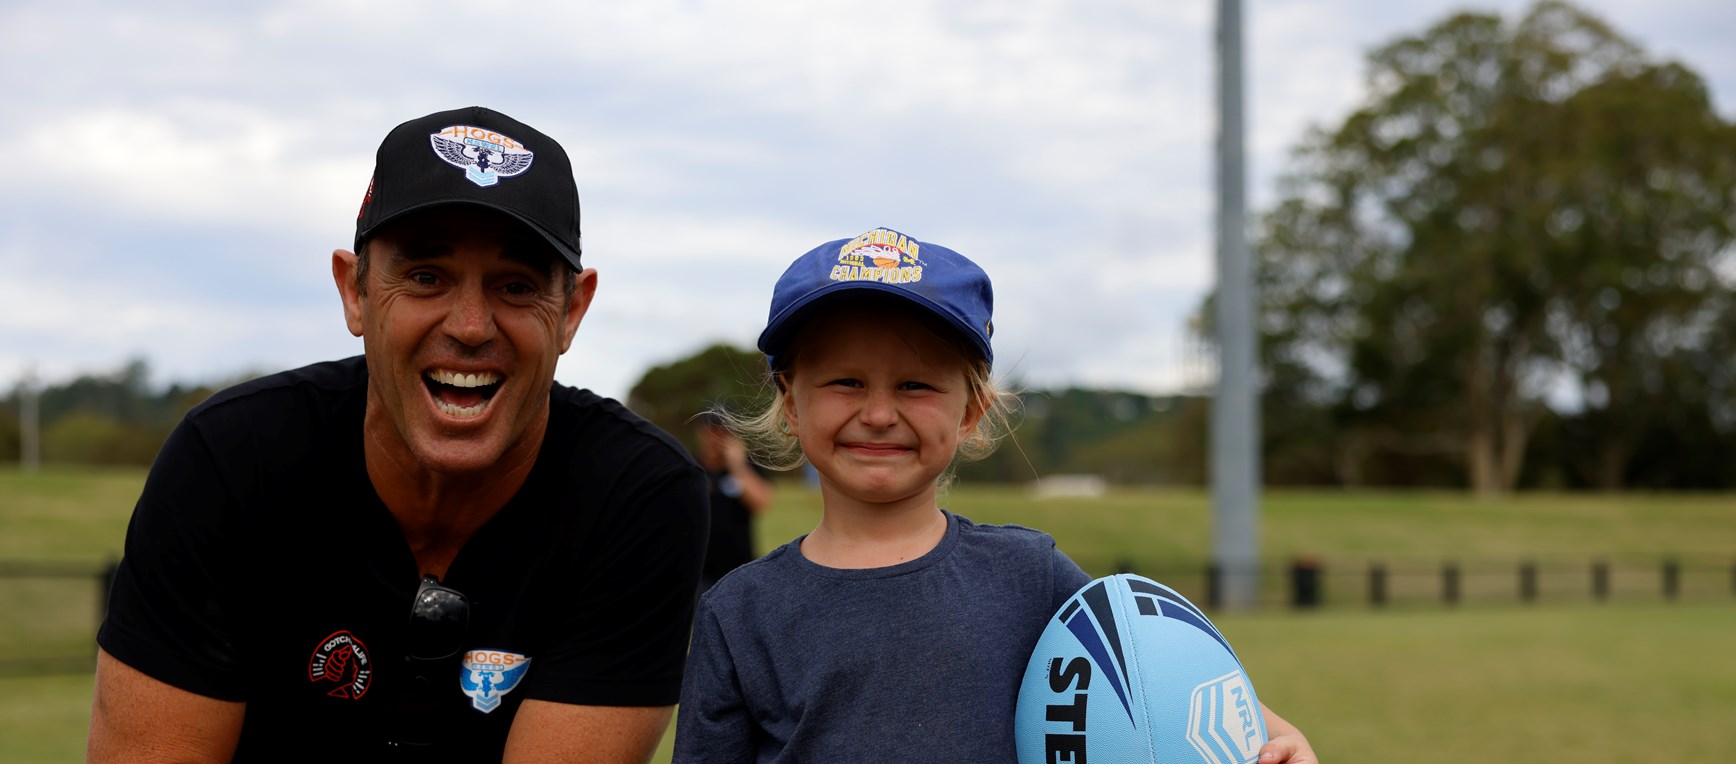 Gallery | NSWRL Hogs Tour - Day Five